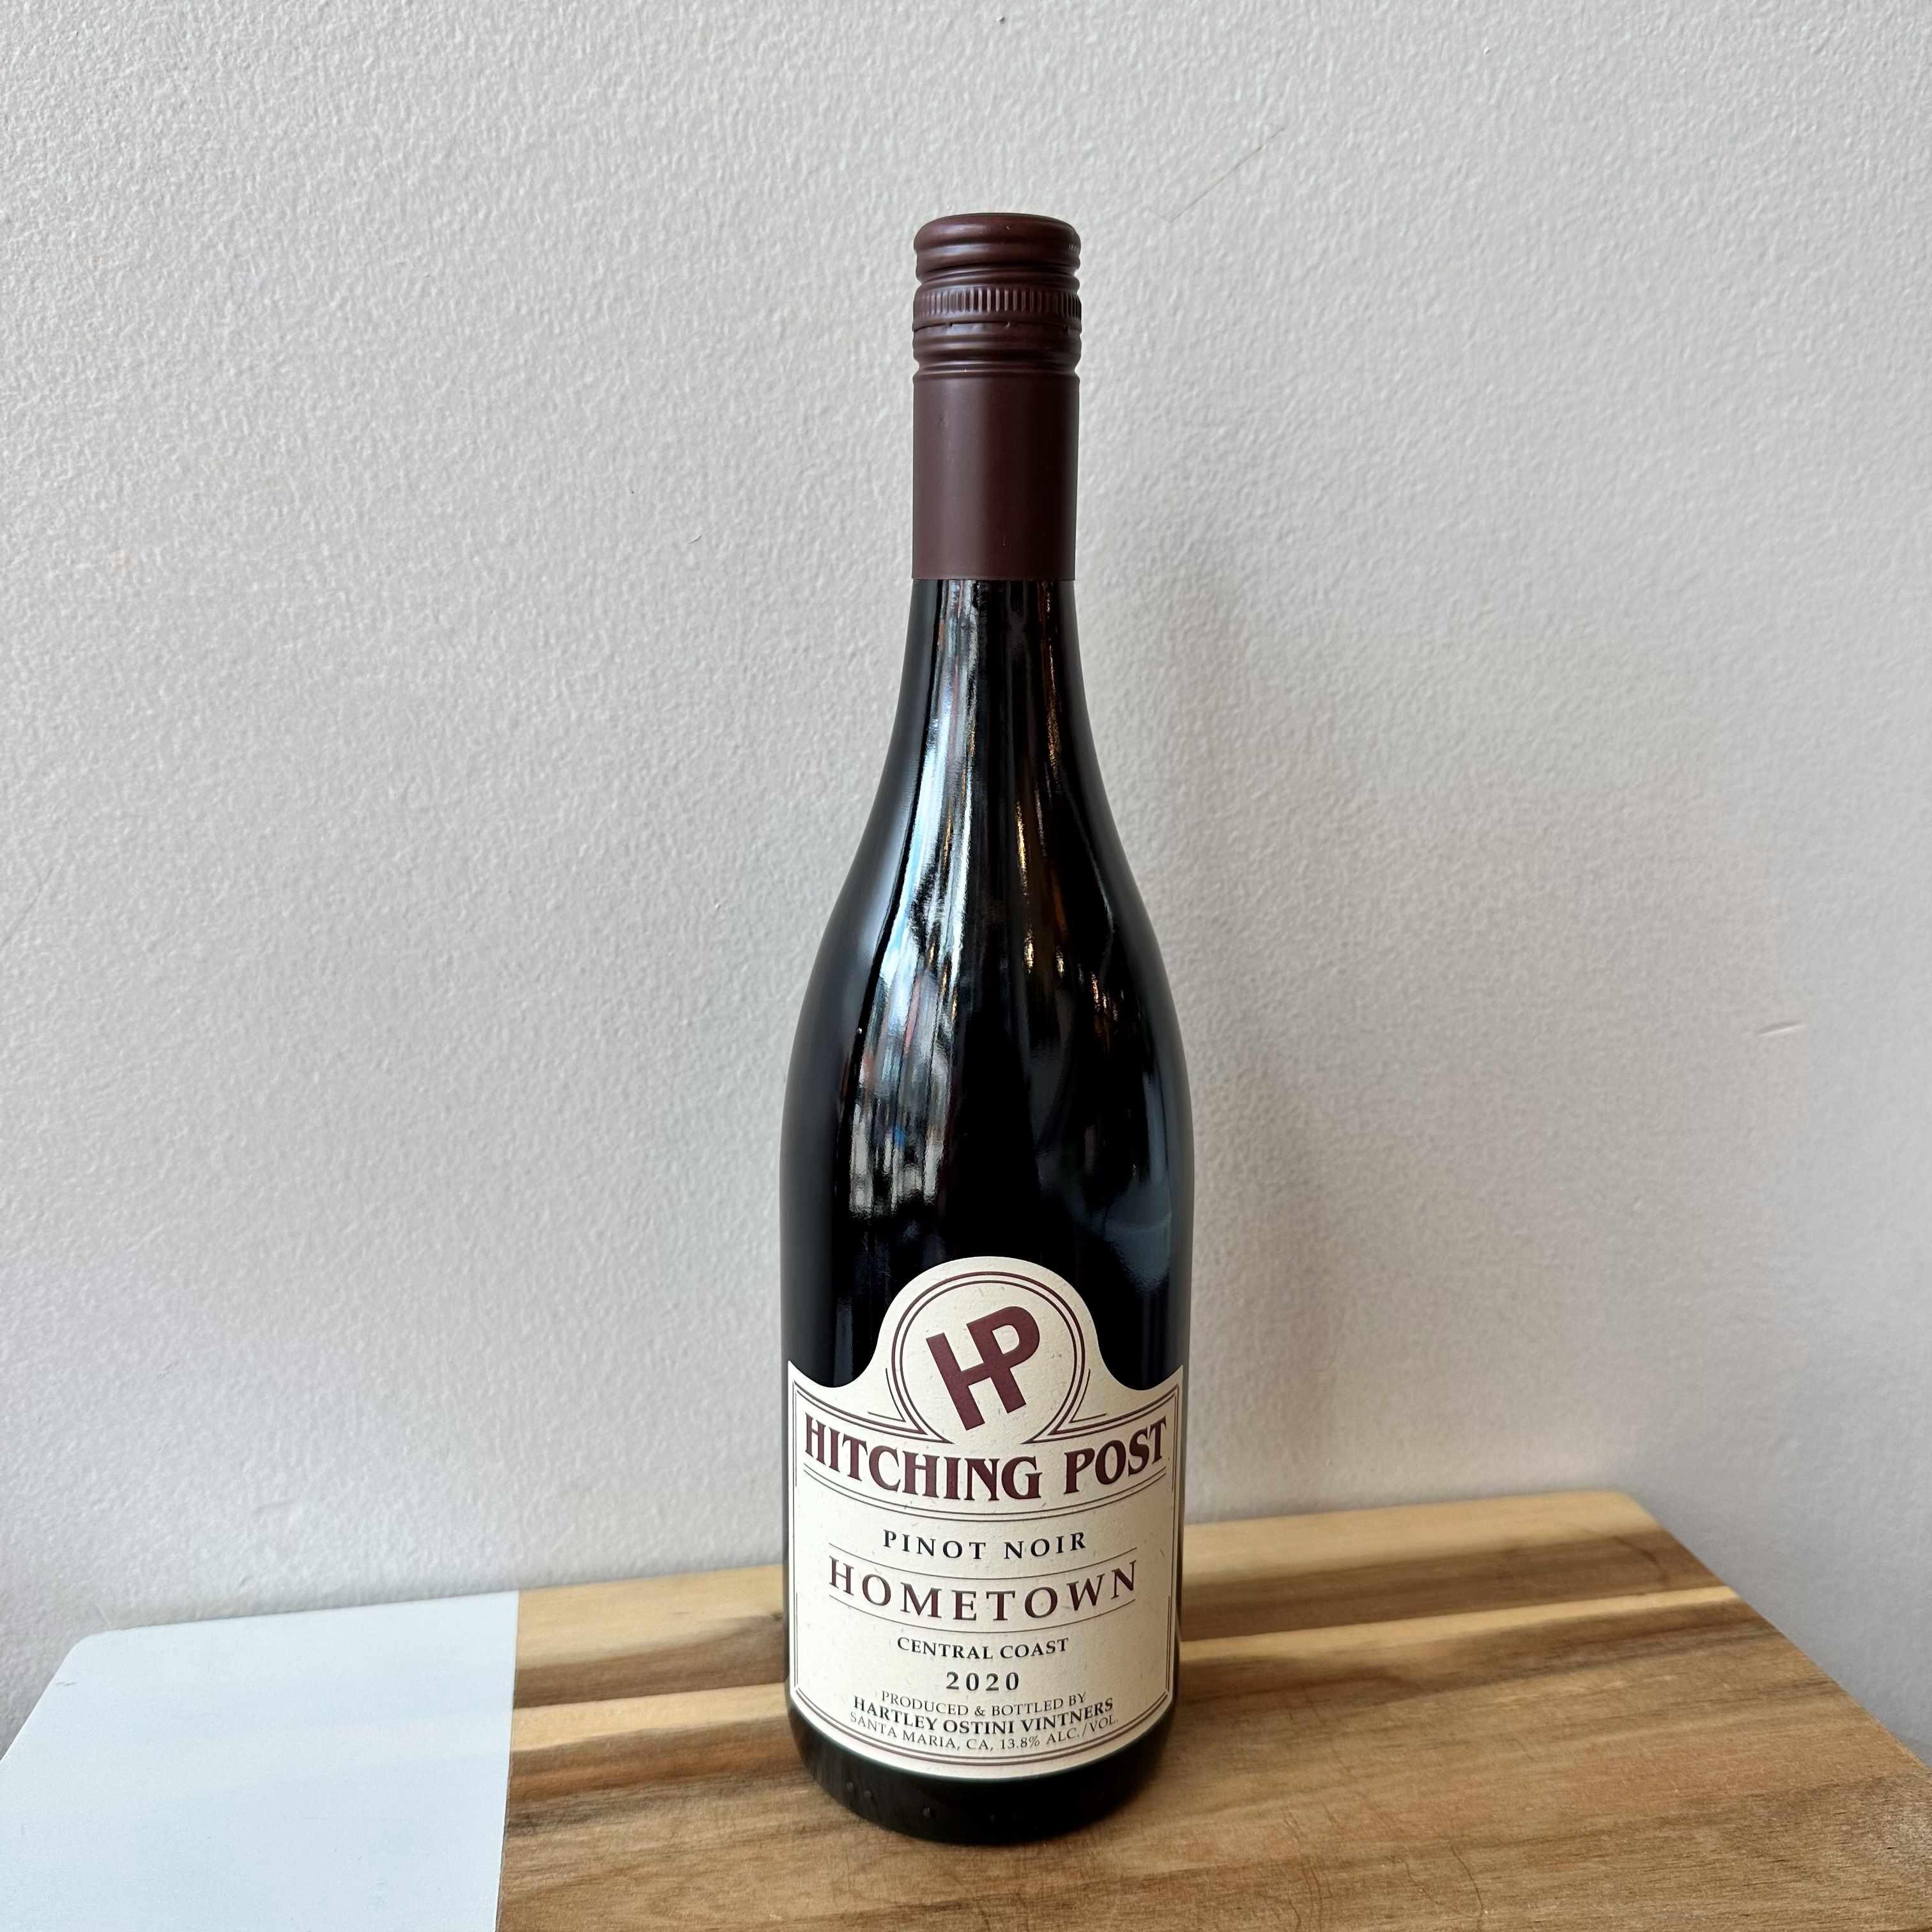 Hitching Post Wines "Hometown" Pinot Noir 2018 Central Coast California